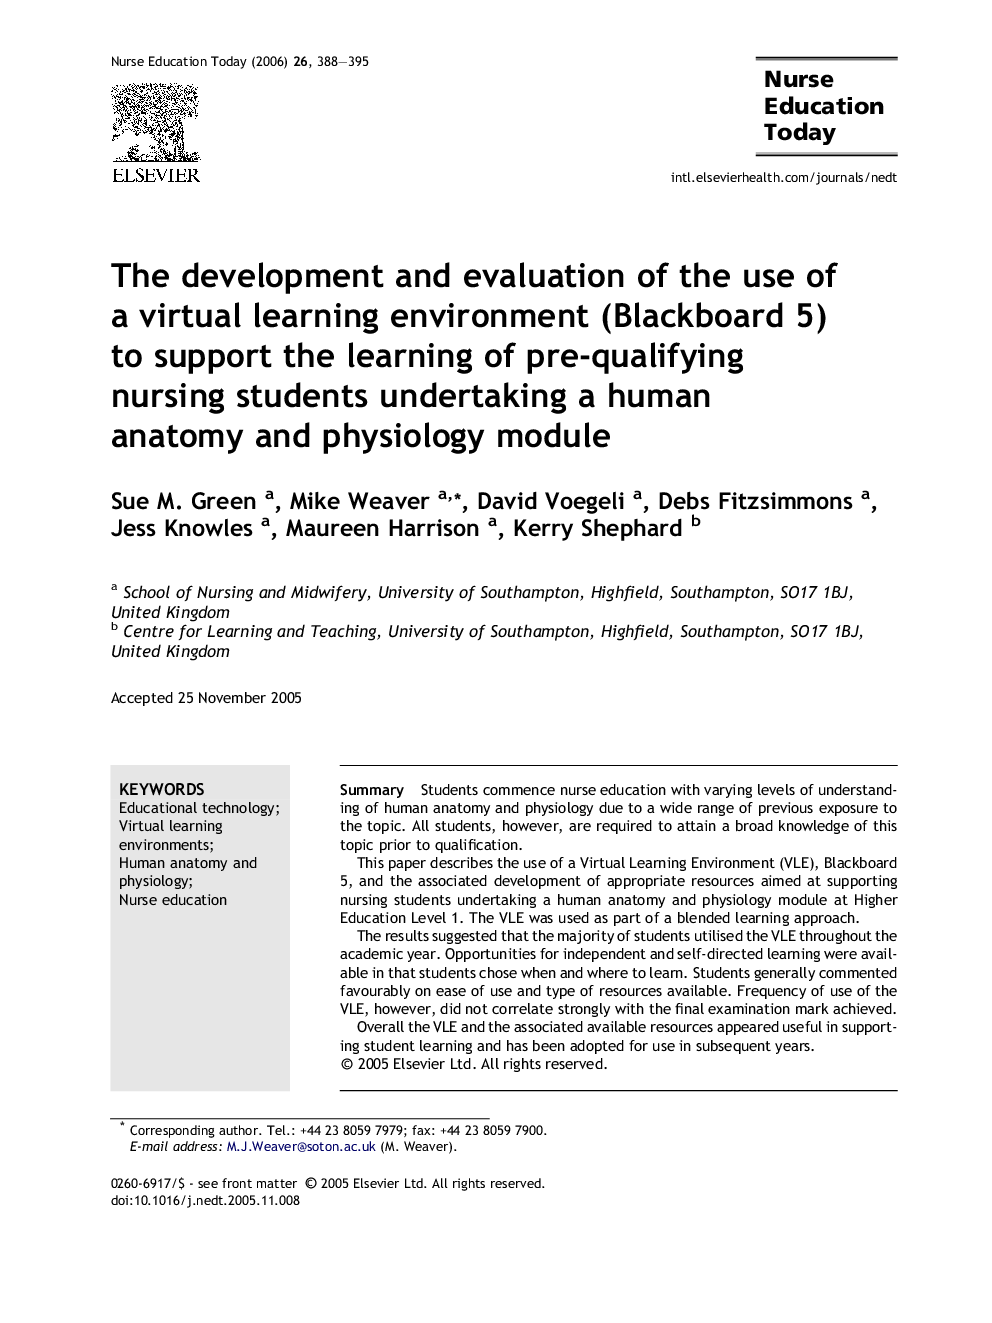 The development and evaluation of the use of a virtual learning environment (Blackboard 5) to support the learning of pre-qualifying nursing students undertaking a human anatomy and physiology module